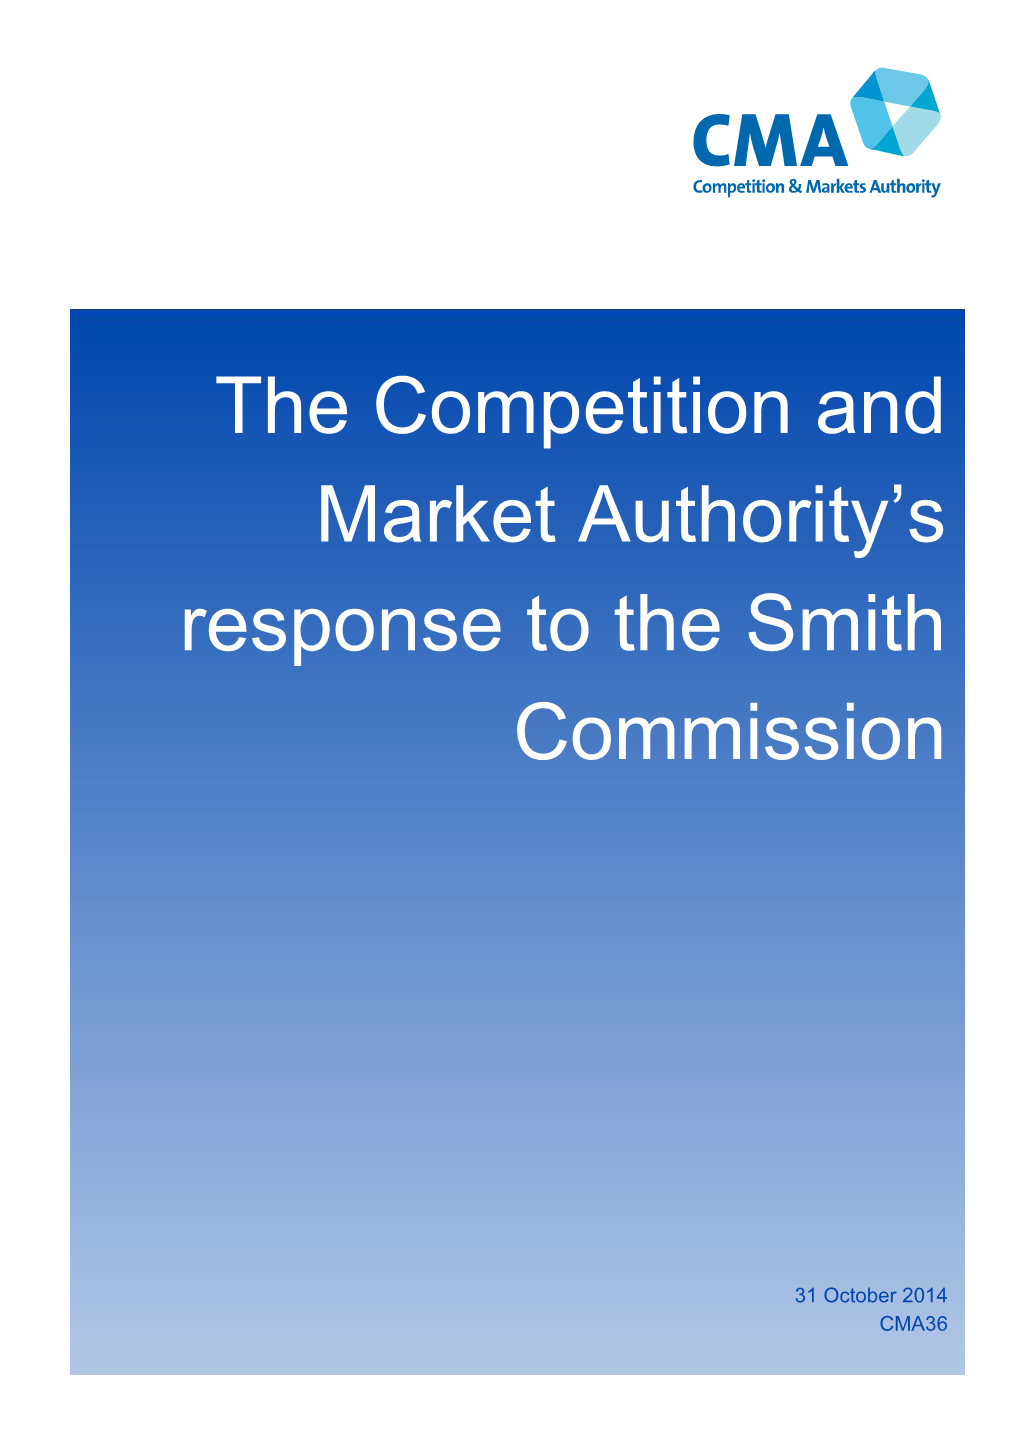 CMA's Response to the Smith Commission